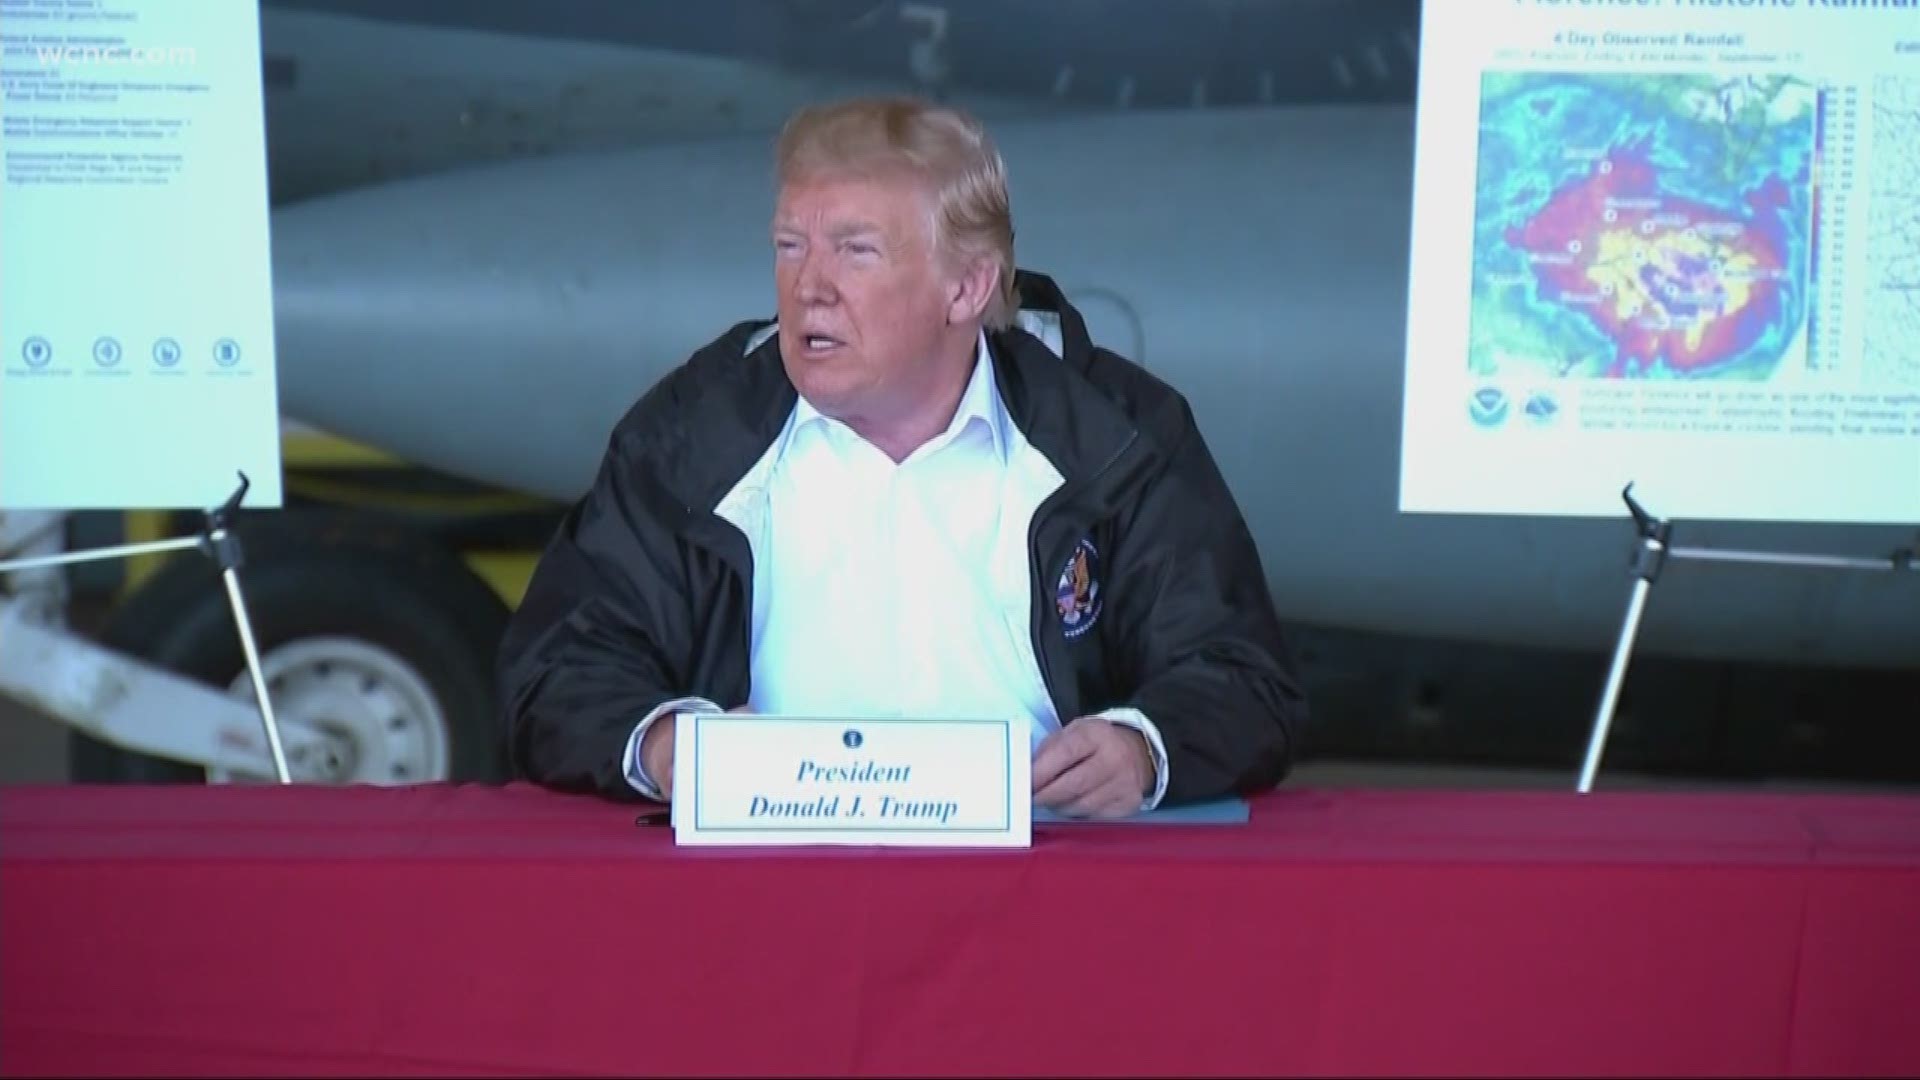 Handing out hot dogs, hugs and comforting words, President Donald Trump sought Wednesday to soothe those who suffered losses in Hurricane Florence, declaring that "America grieves for you" as he surveyed damage the powerful storm left behind.